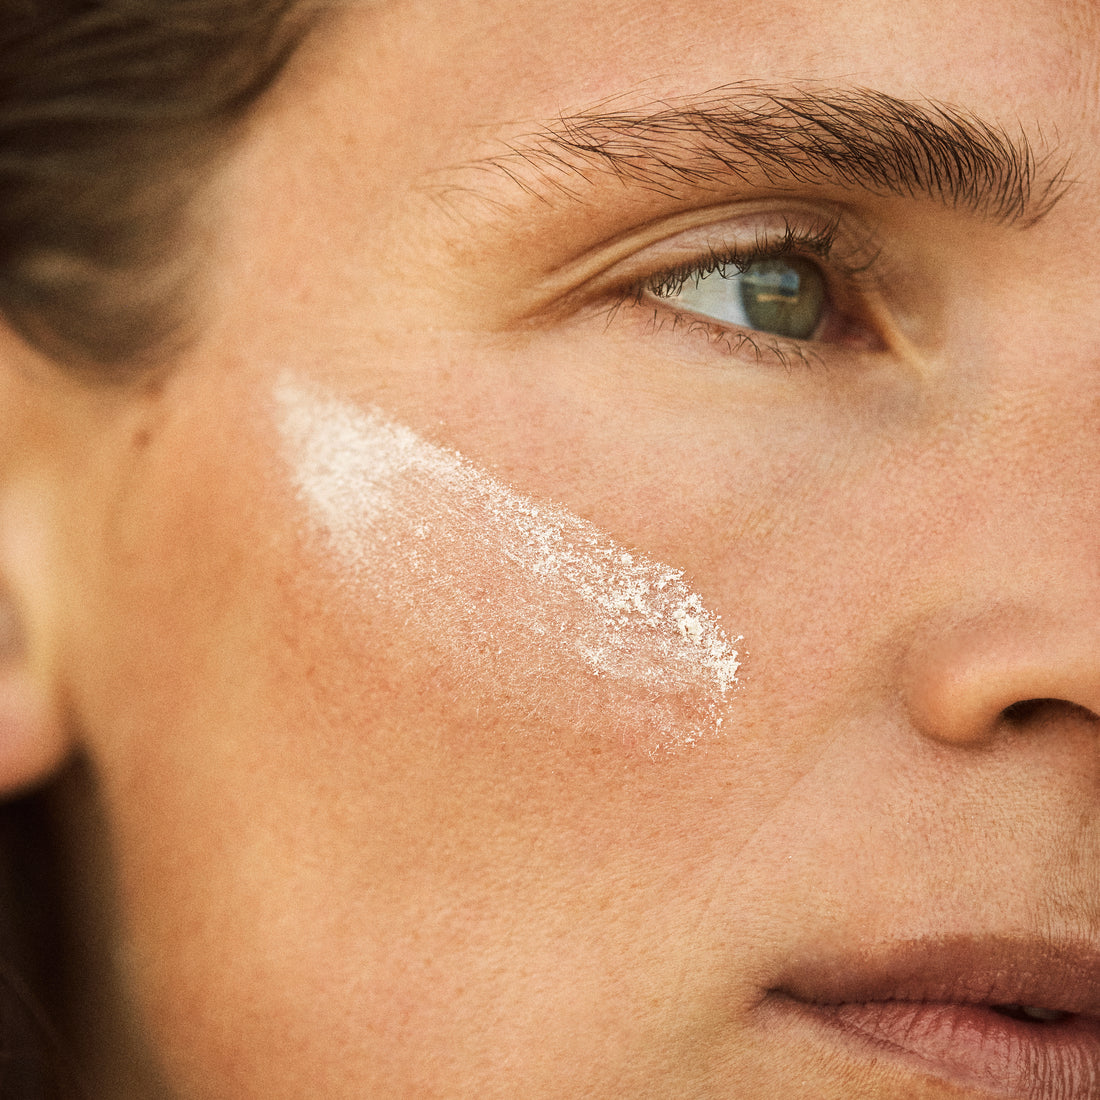 Summer skincare dos and don'ts